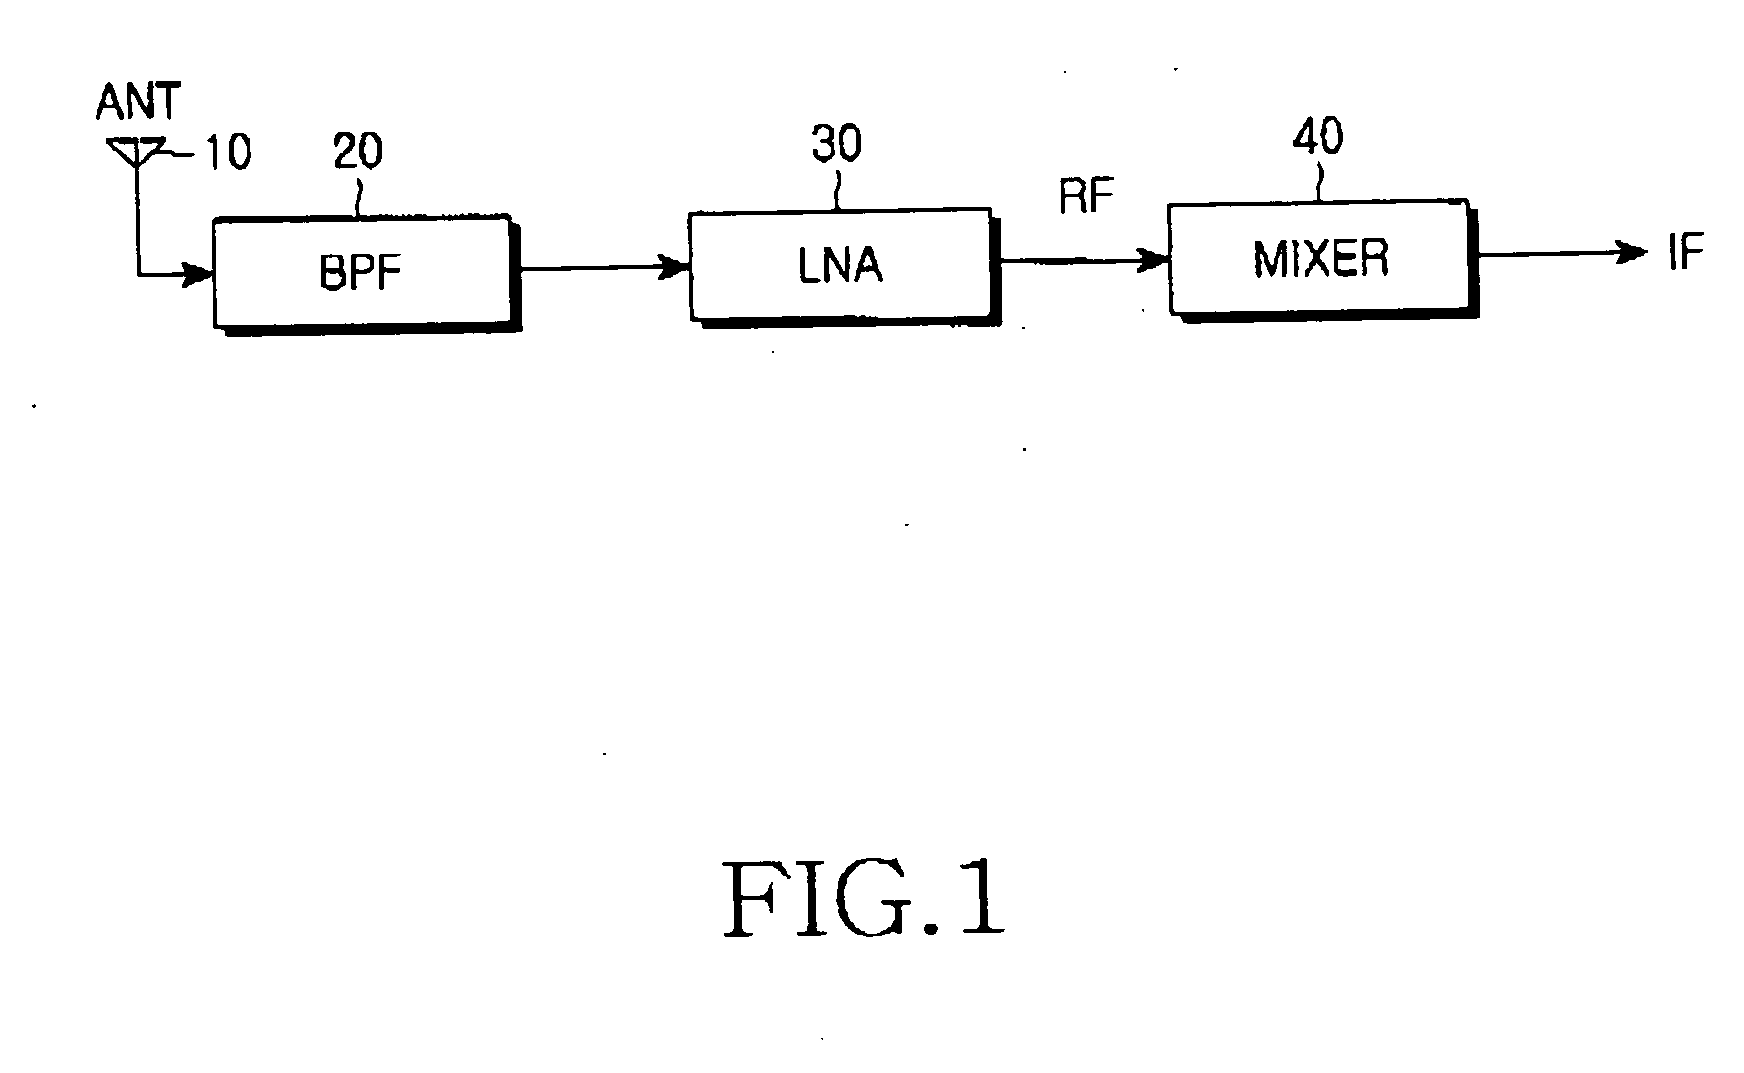 CMOS mixer for use in direct conversion receiver